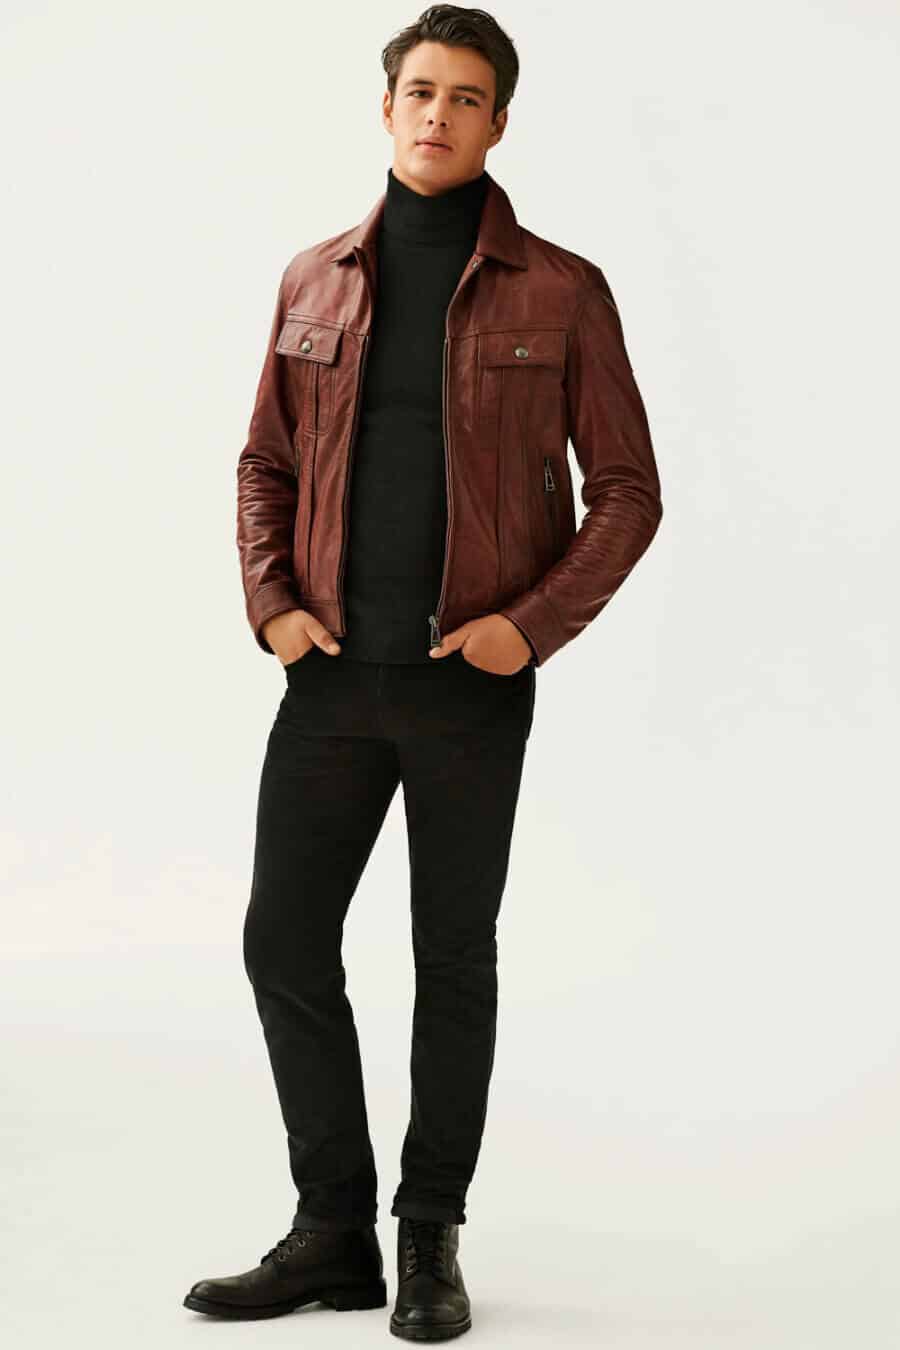 Men's brown leather jacket, black roll neck, jeans and boots outfit 